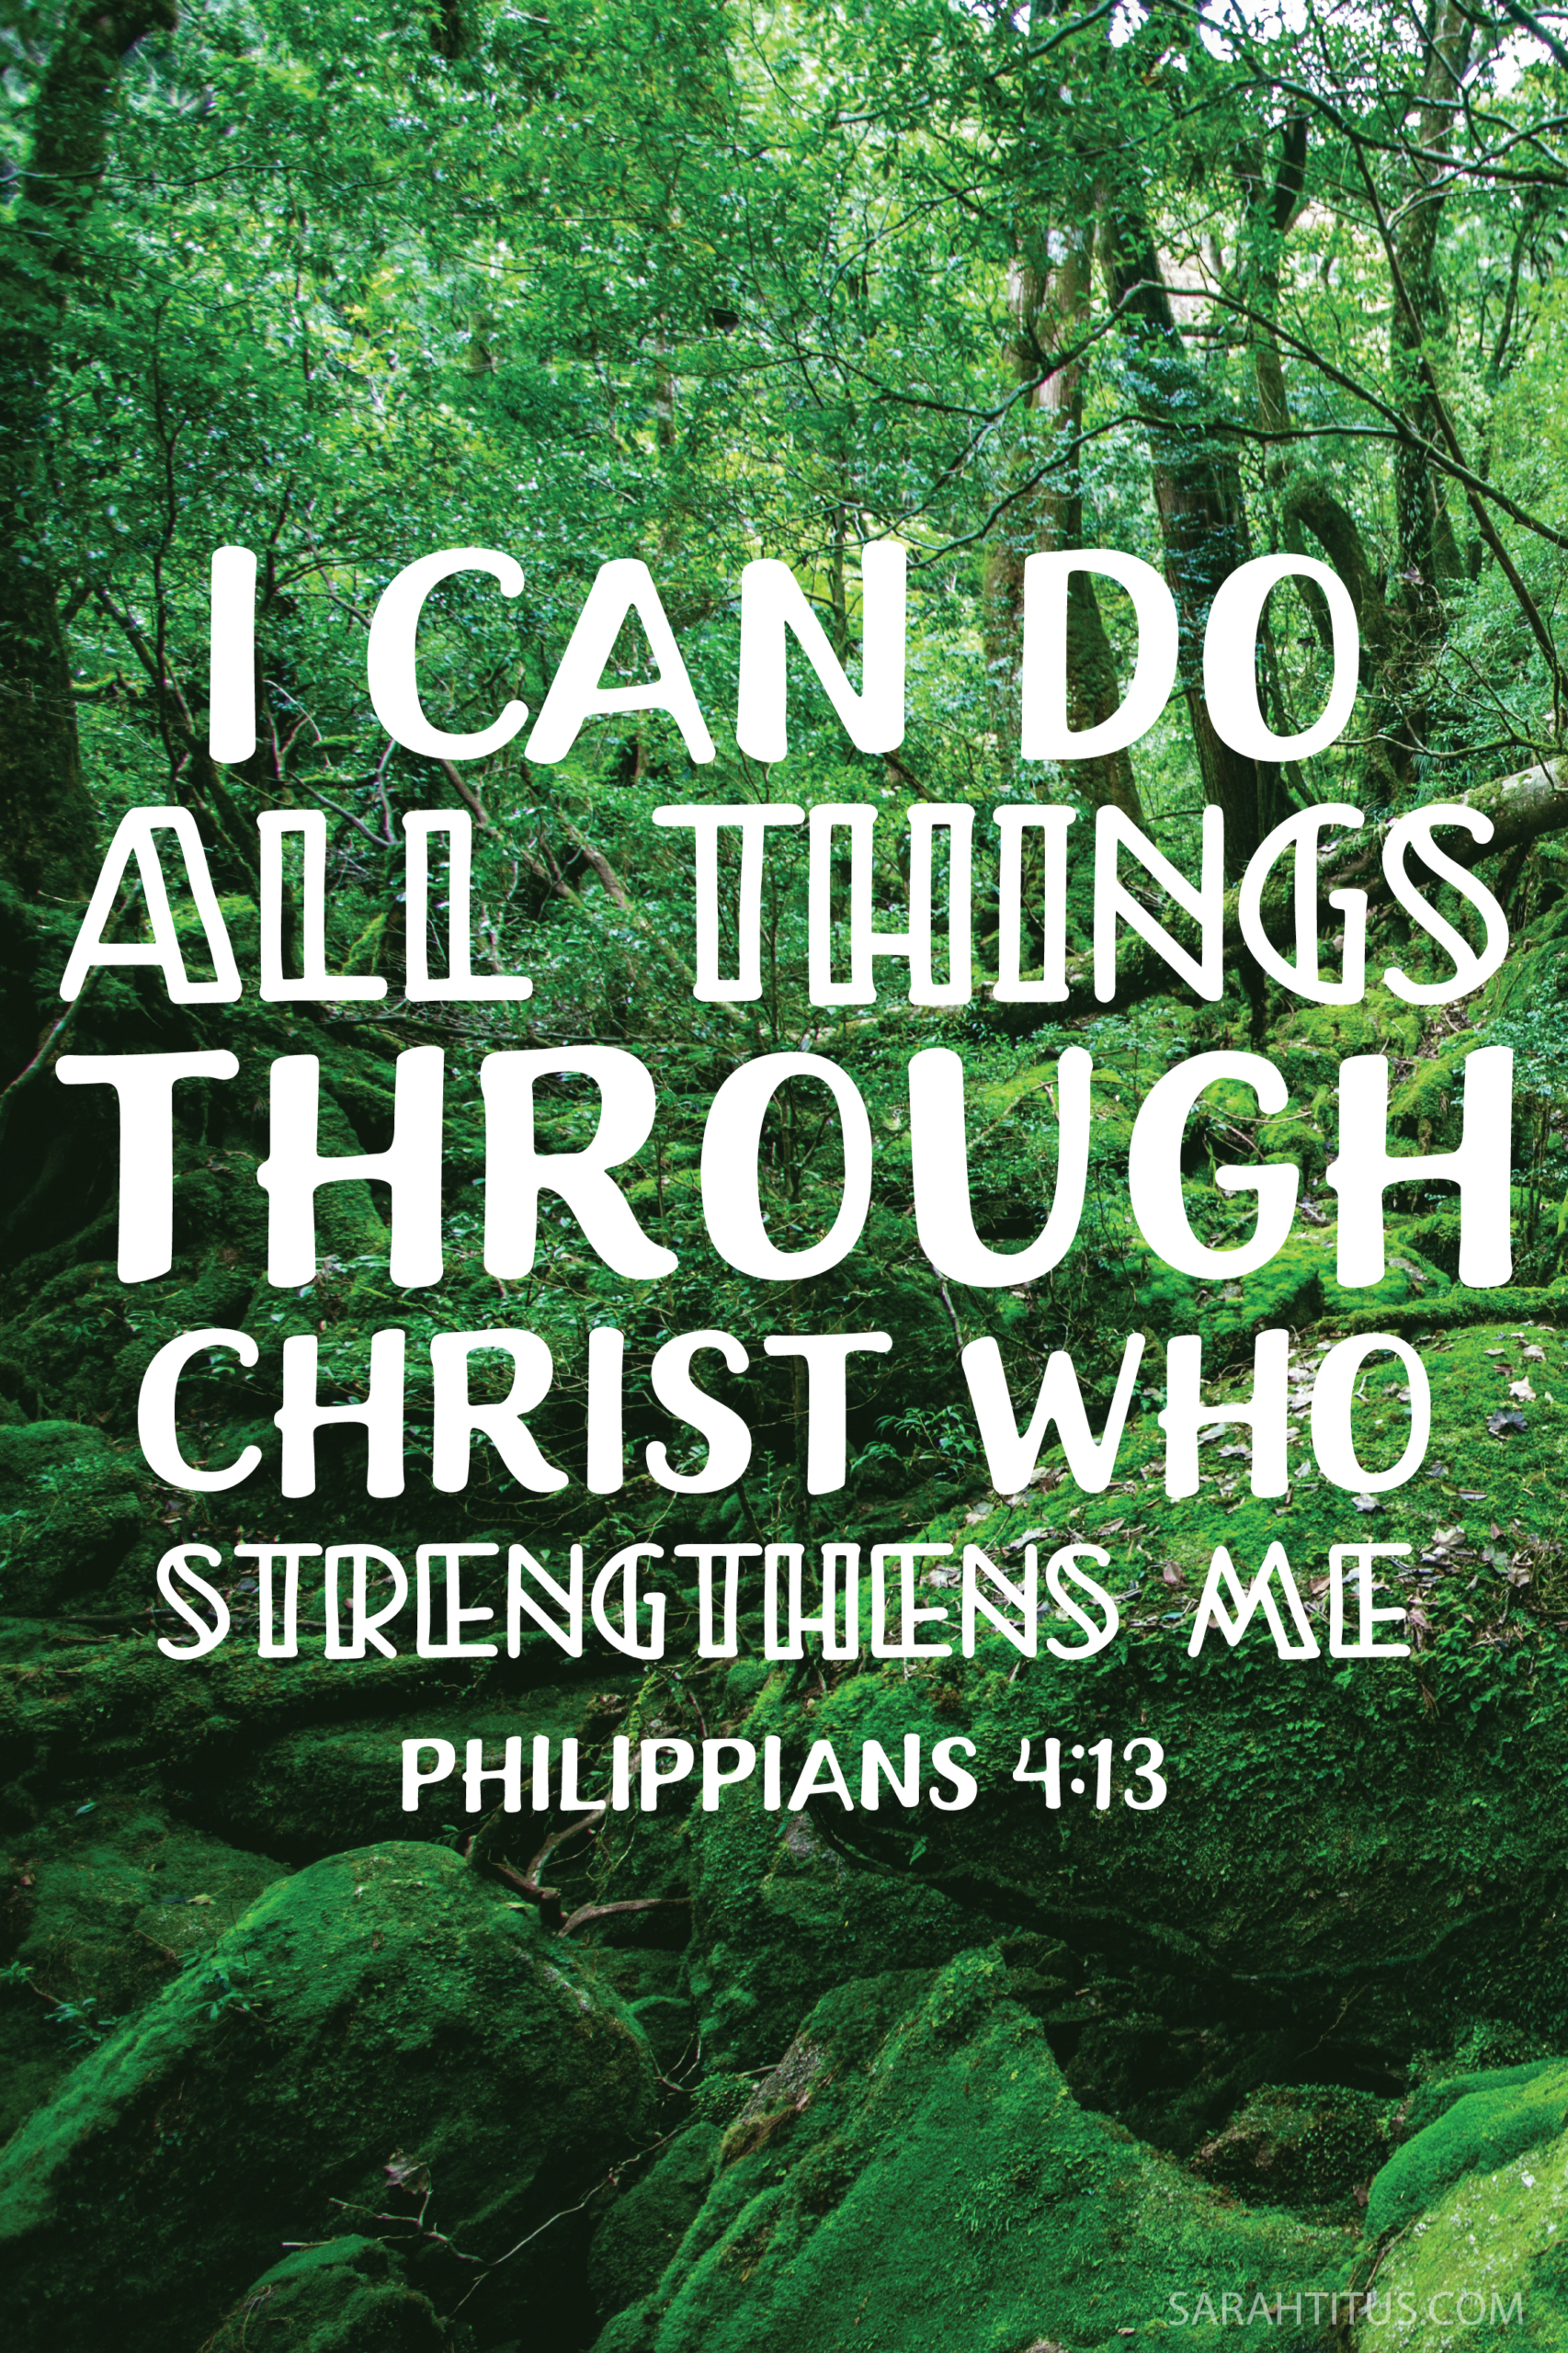 Tamilchristianwallpapers  Bible wallpaper Philippians 413 I can do all  things through Christ which strengtheneth me Full Size  httpschristwordscomwallpapersenPhilippians413enjpg  Facebook